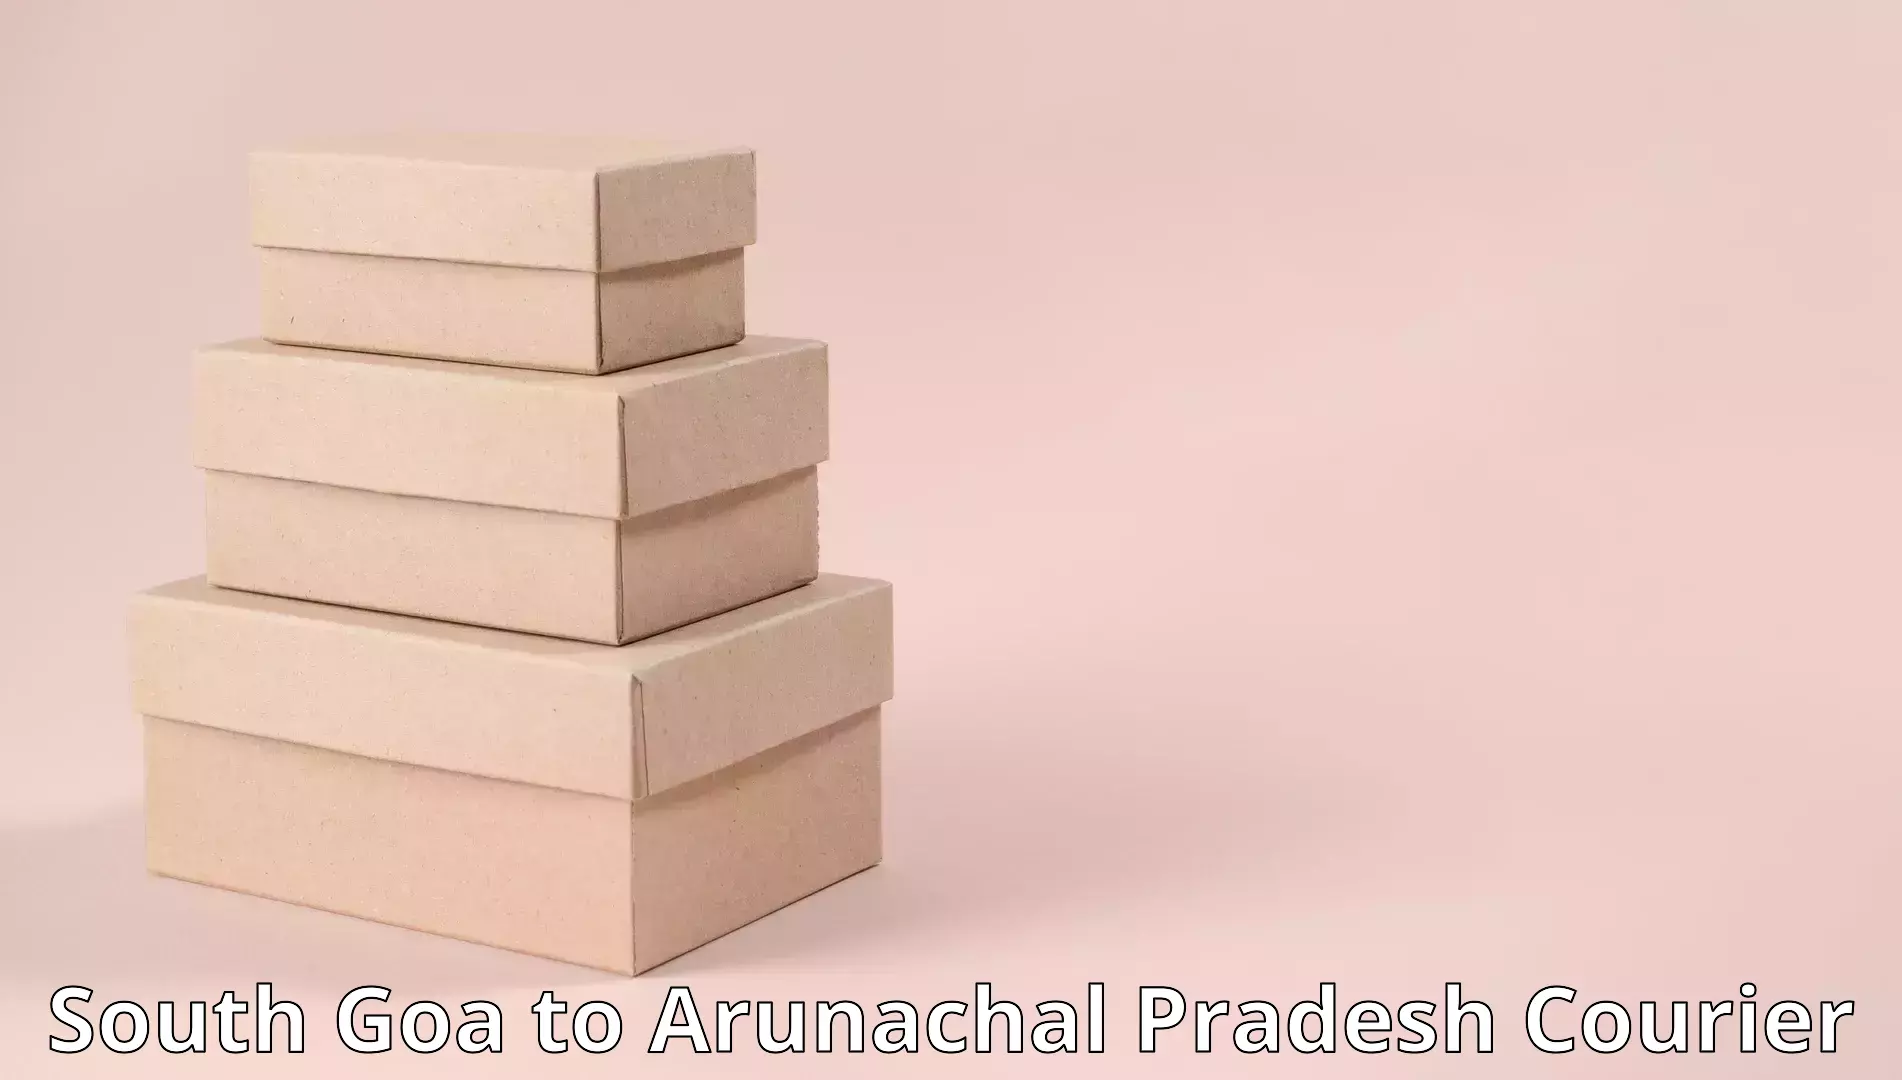 Cost-effective moving options South Goa to Arunachal Pradesh